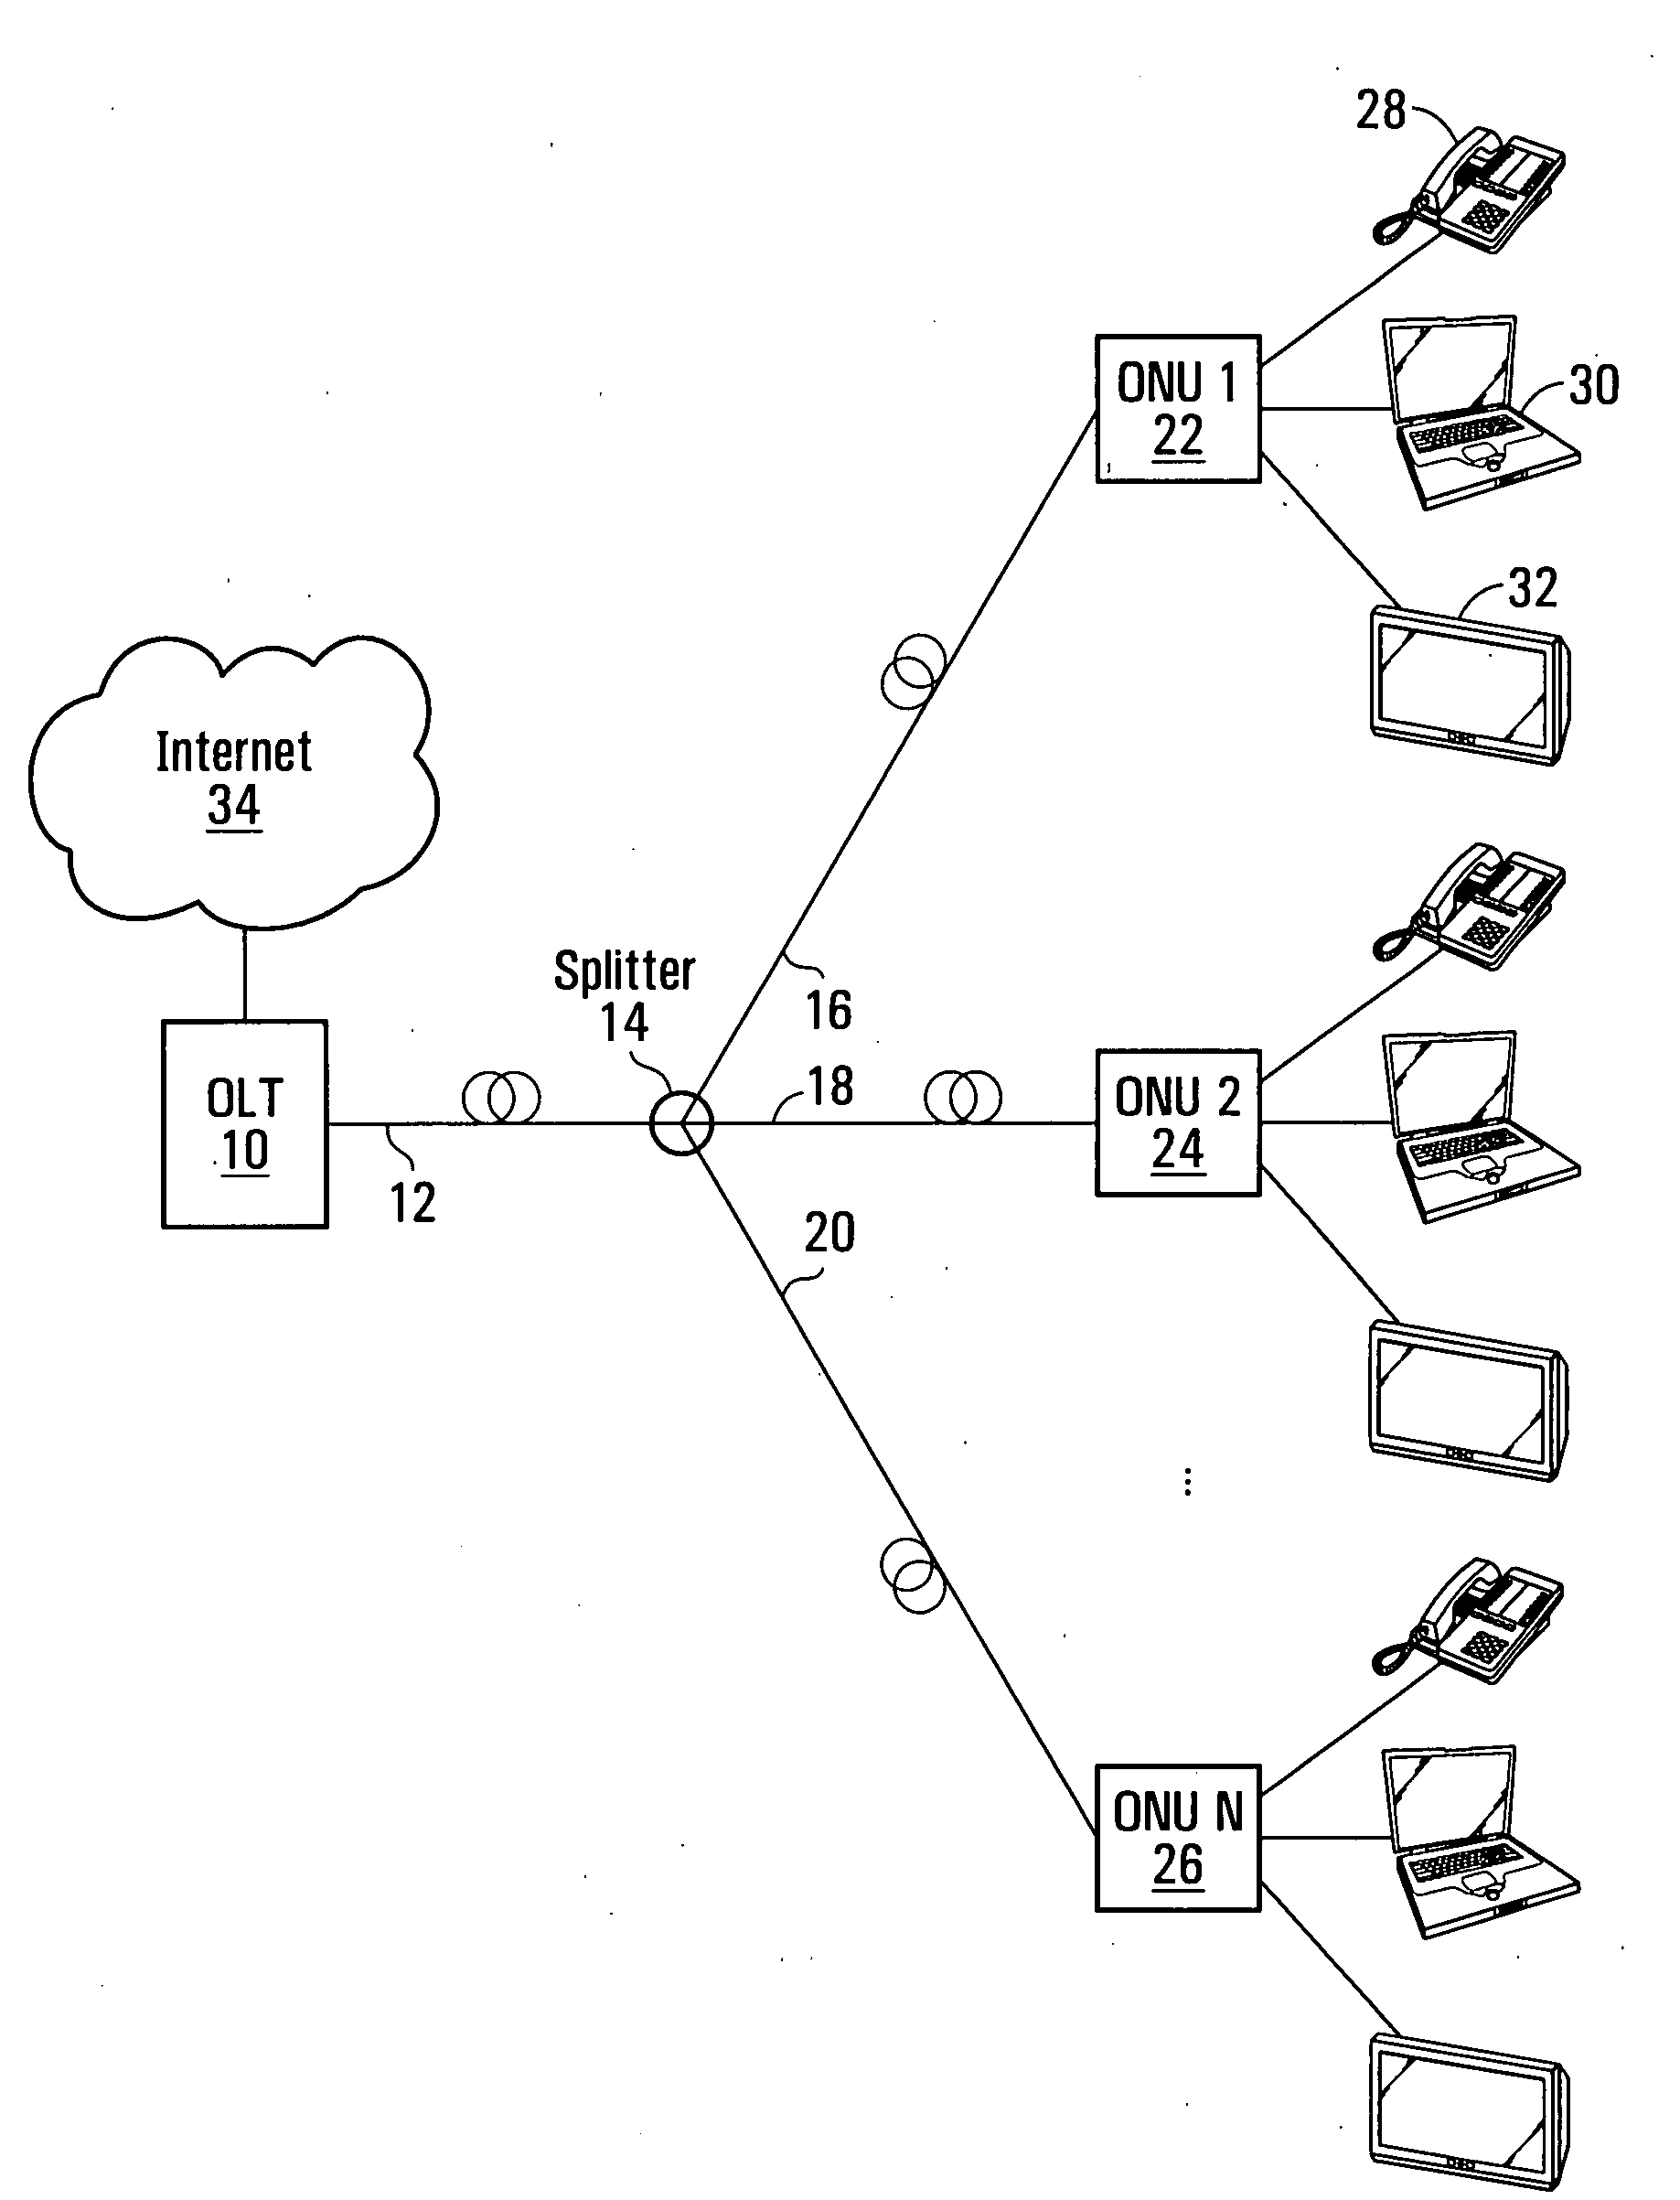 Method and apparatus for protection switching in passive optical network